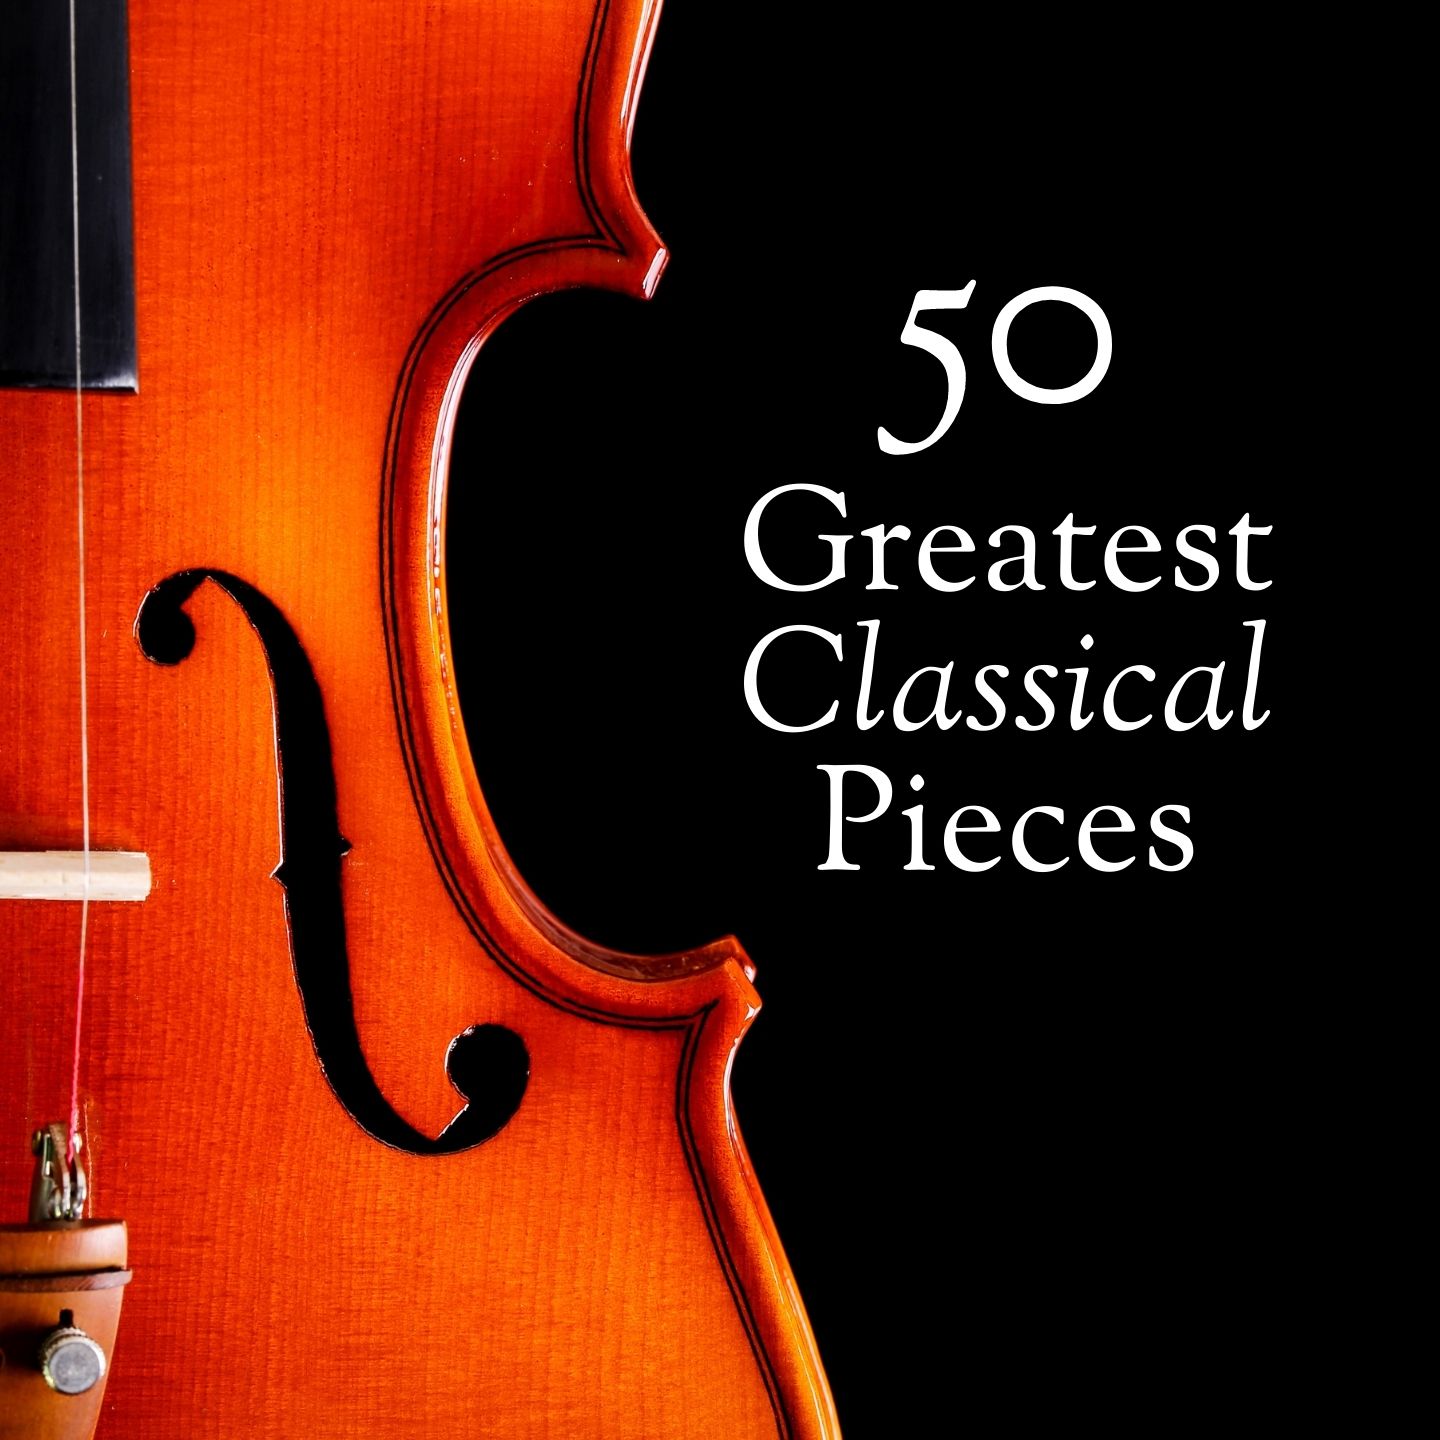 The Best of Classical Music - 50 Greatest Pieces: Mozart, Beethoven, Chopin, Bach..